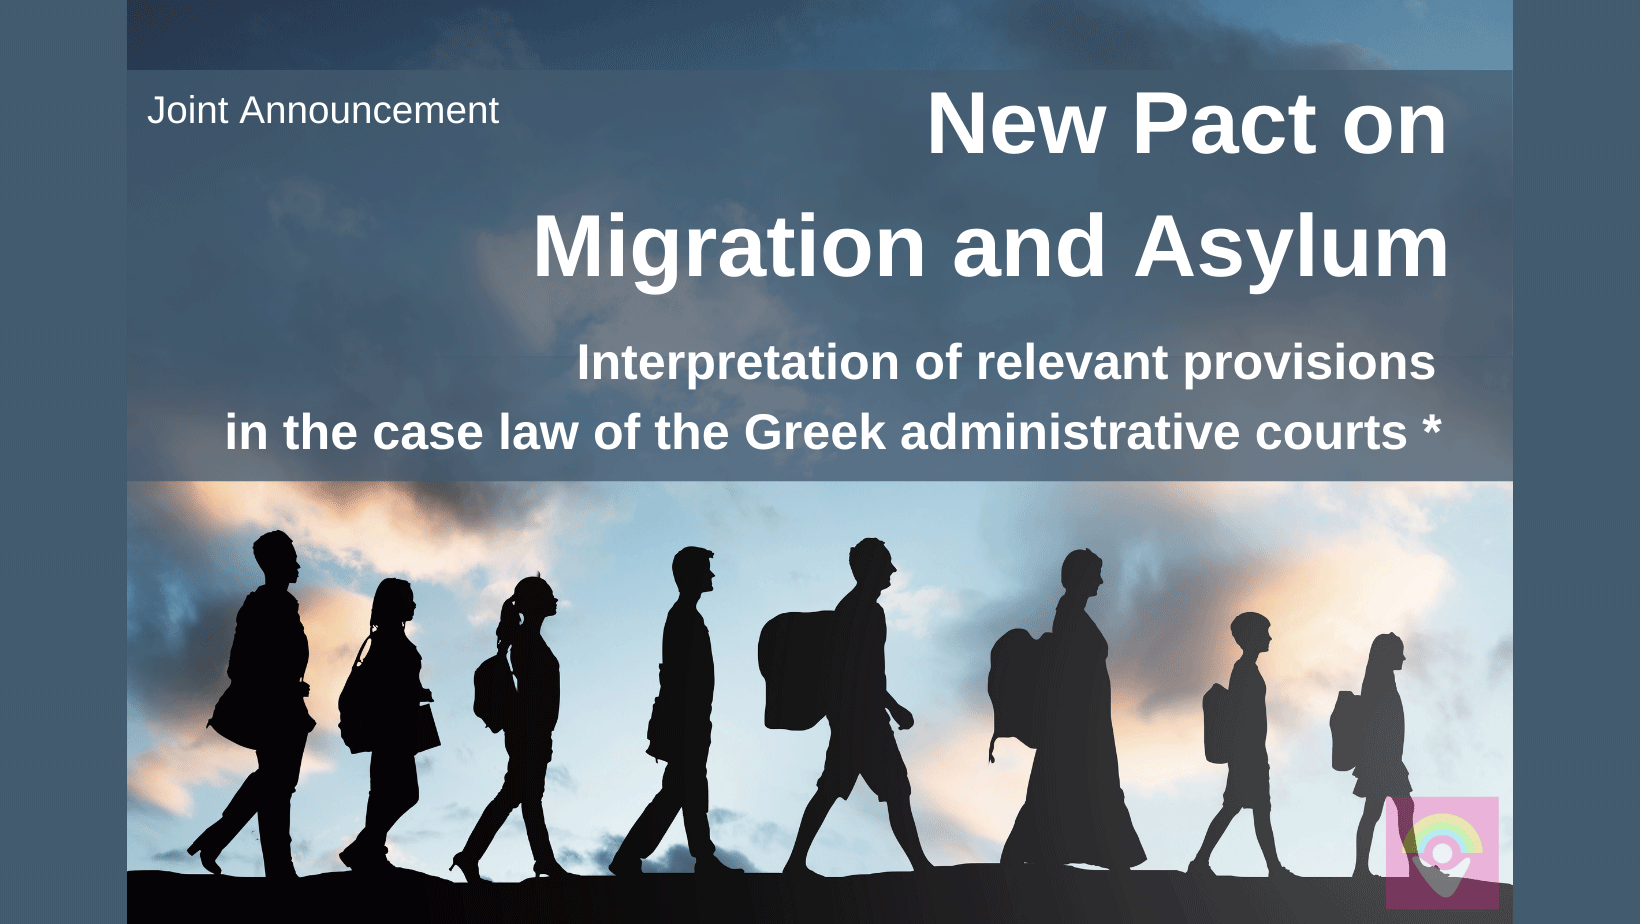 Joint Announcement: New Pact on Migration and Asylum